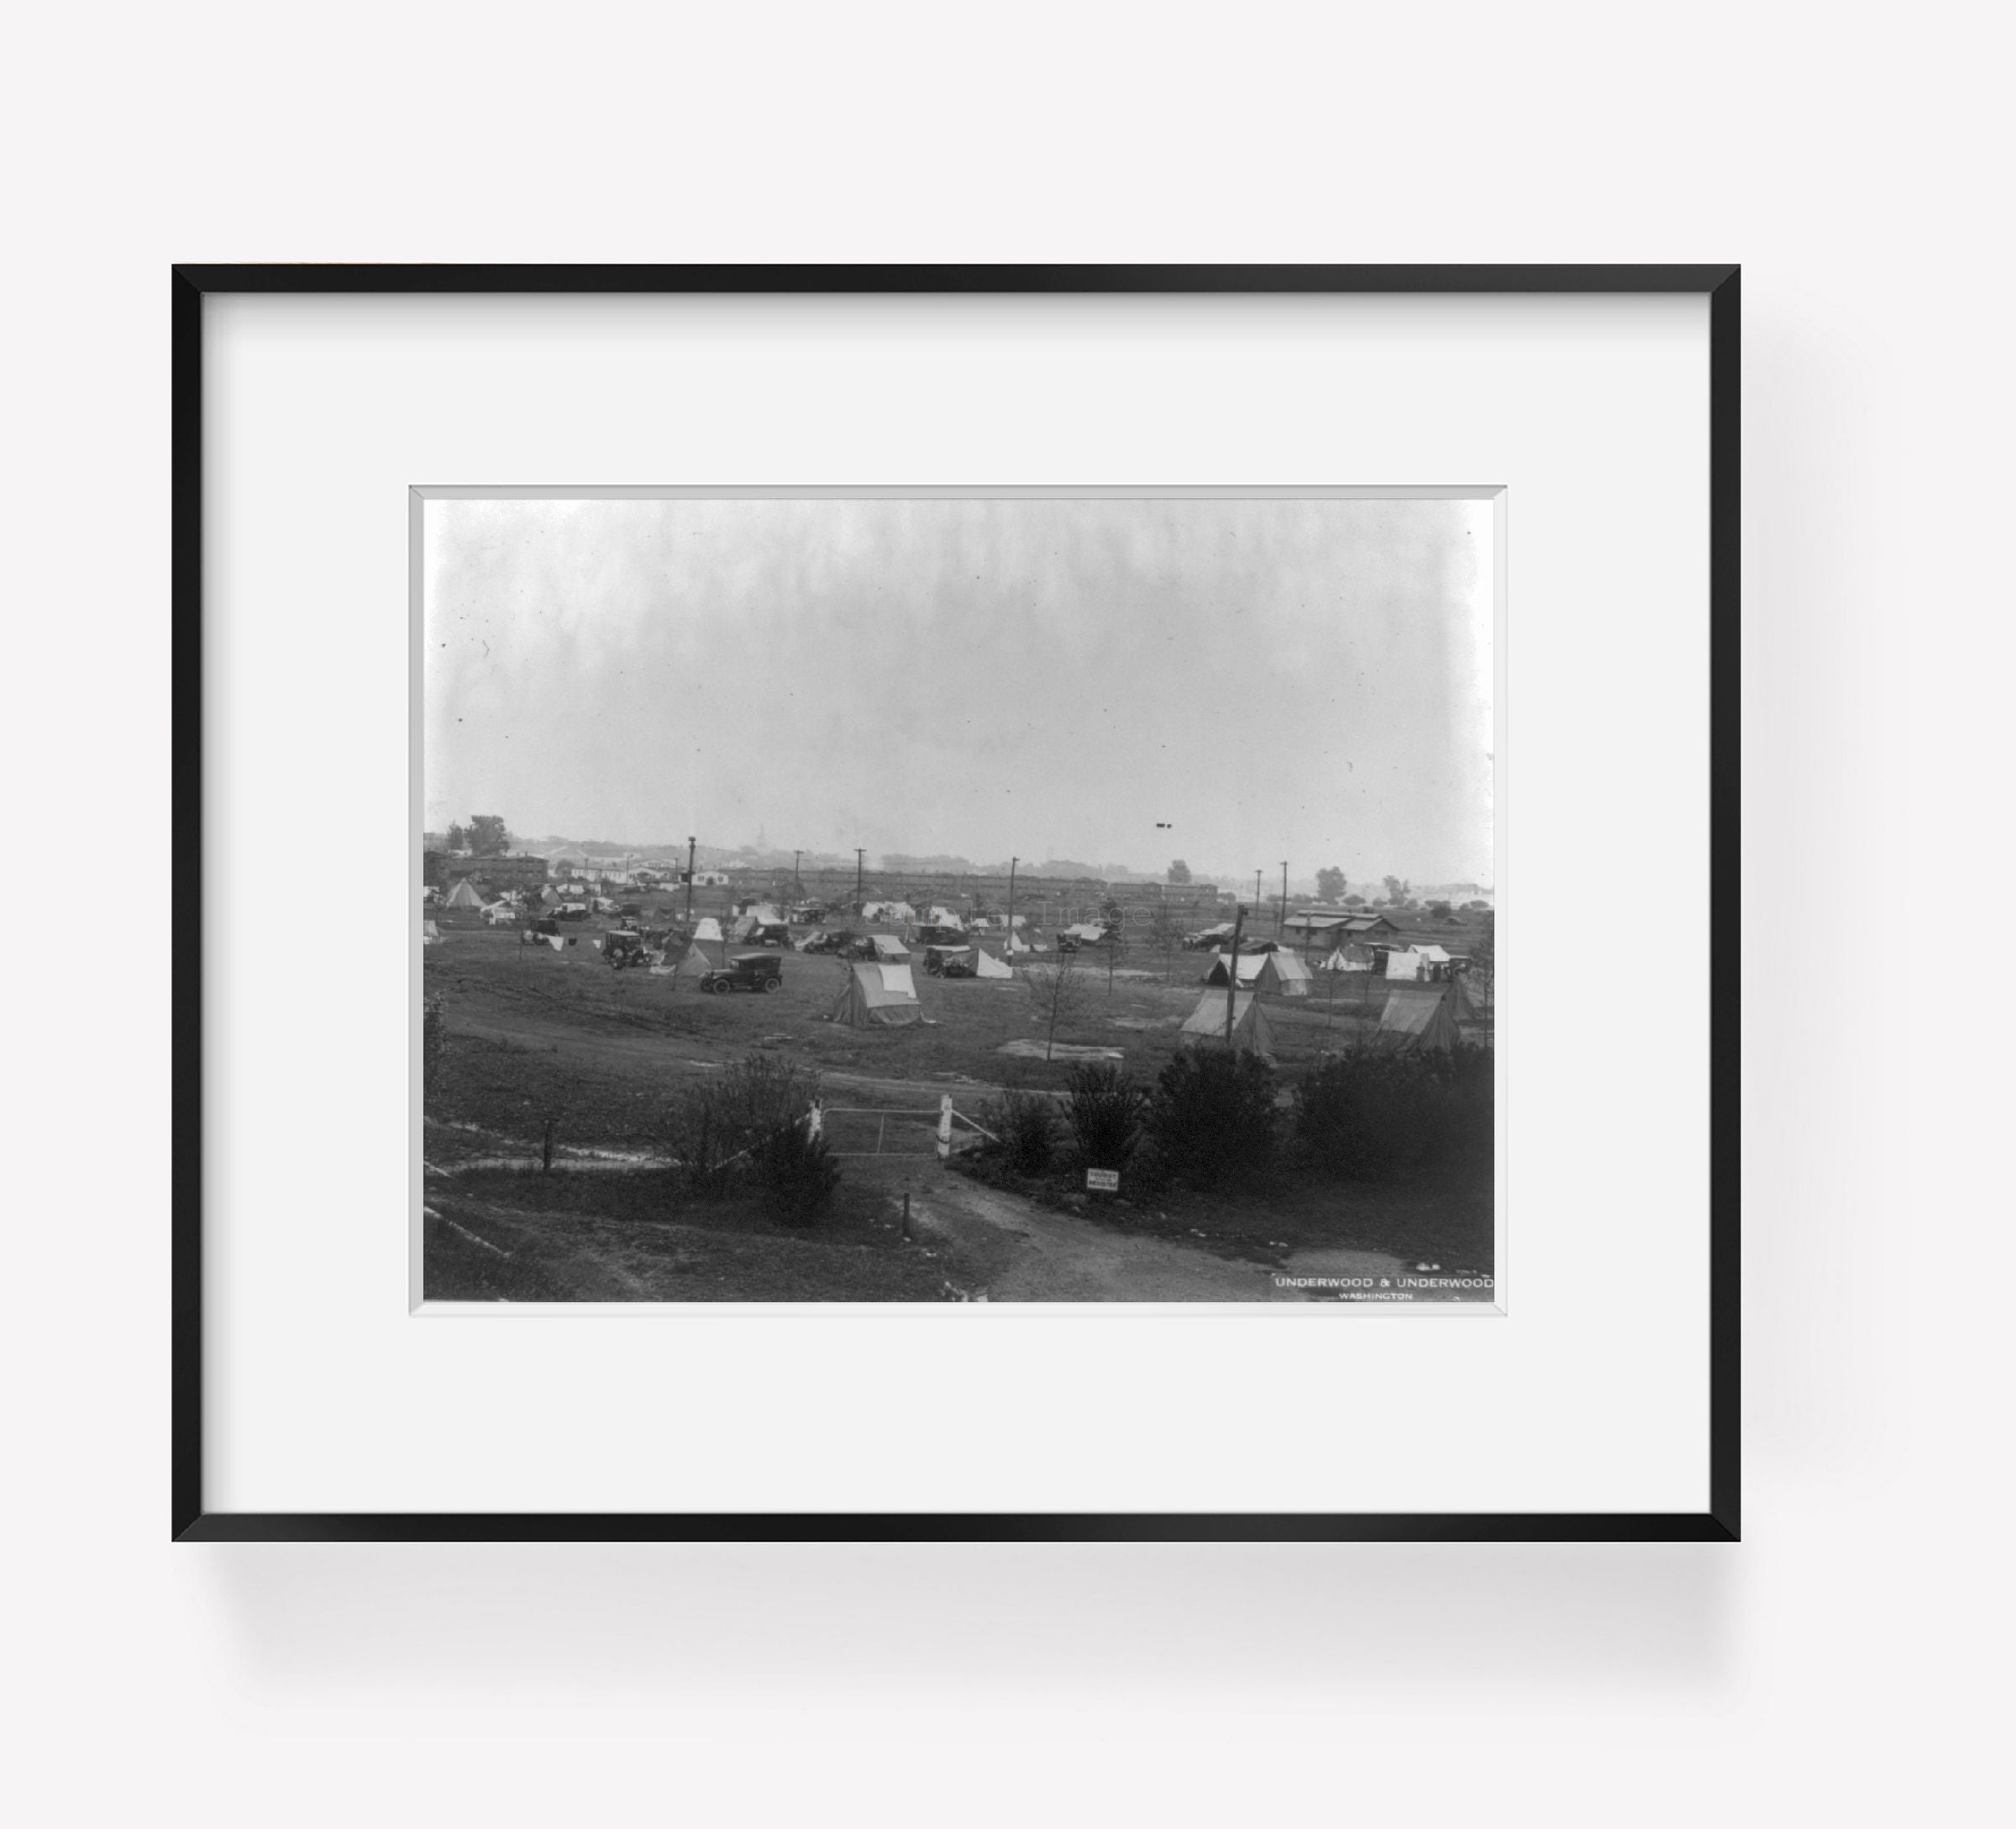 ca. 1918 photograph of Tourist camp with tents and autos, probably near Wash., D